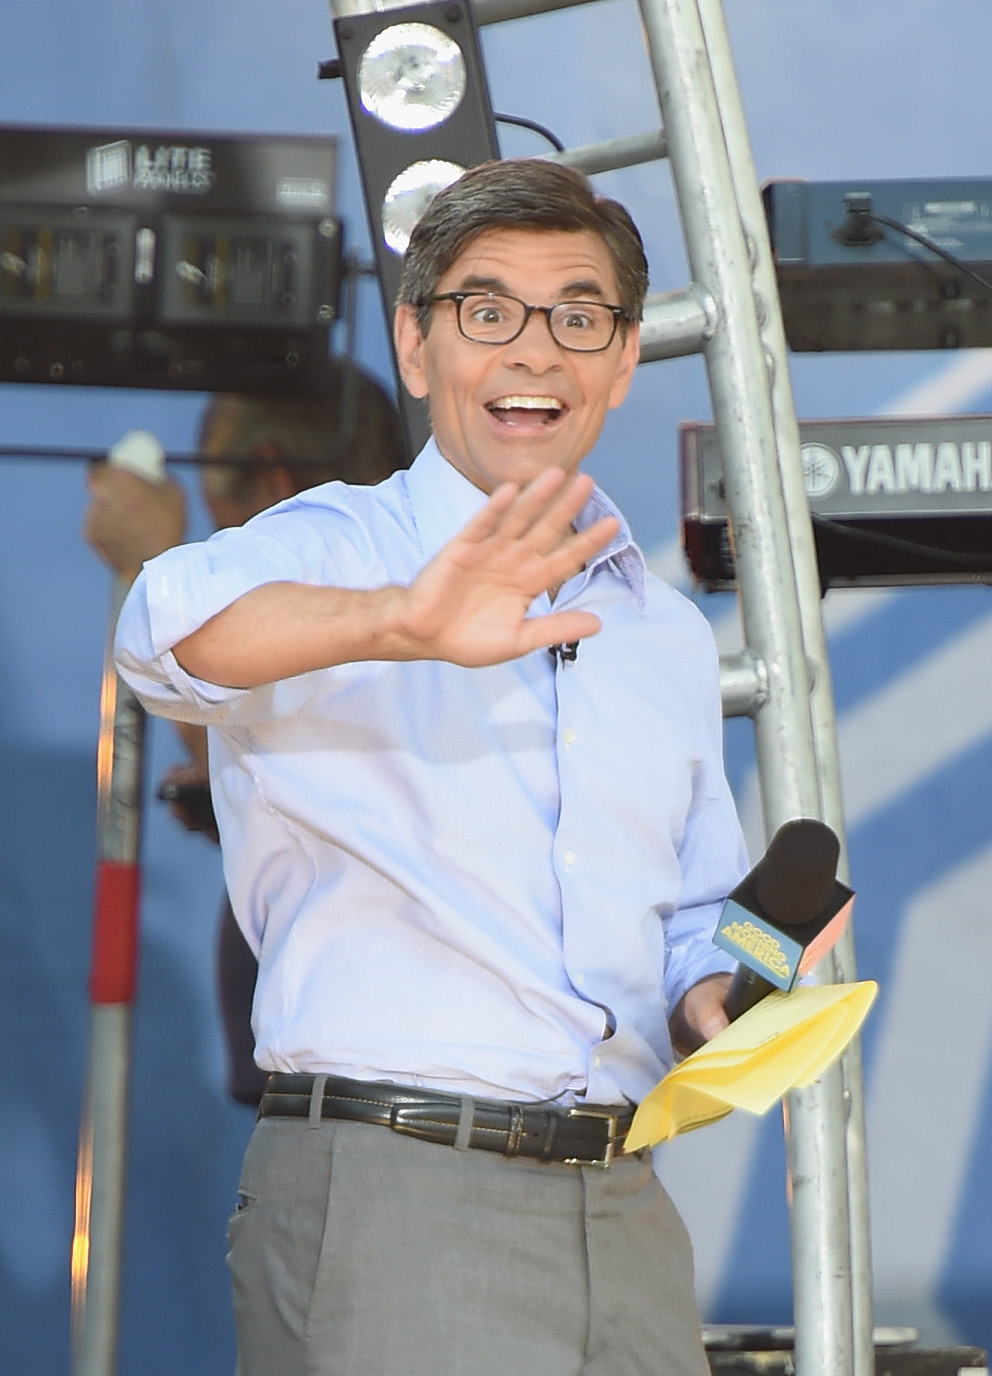 NEW YORK, NY - AUGUST 01:  George Stephanopoulos waves to the crowd on ABC's "Good Morning America" at Rumsey Playfield, Central Park on August 1, 2014 in New York City.  